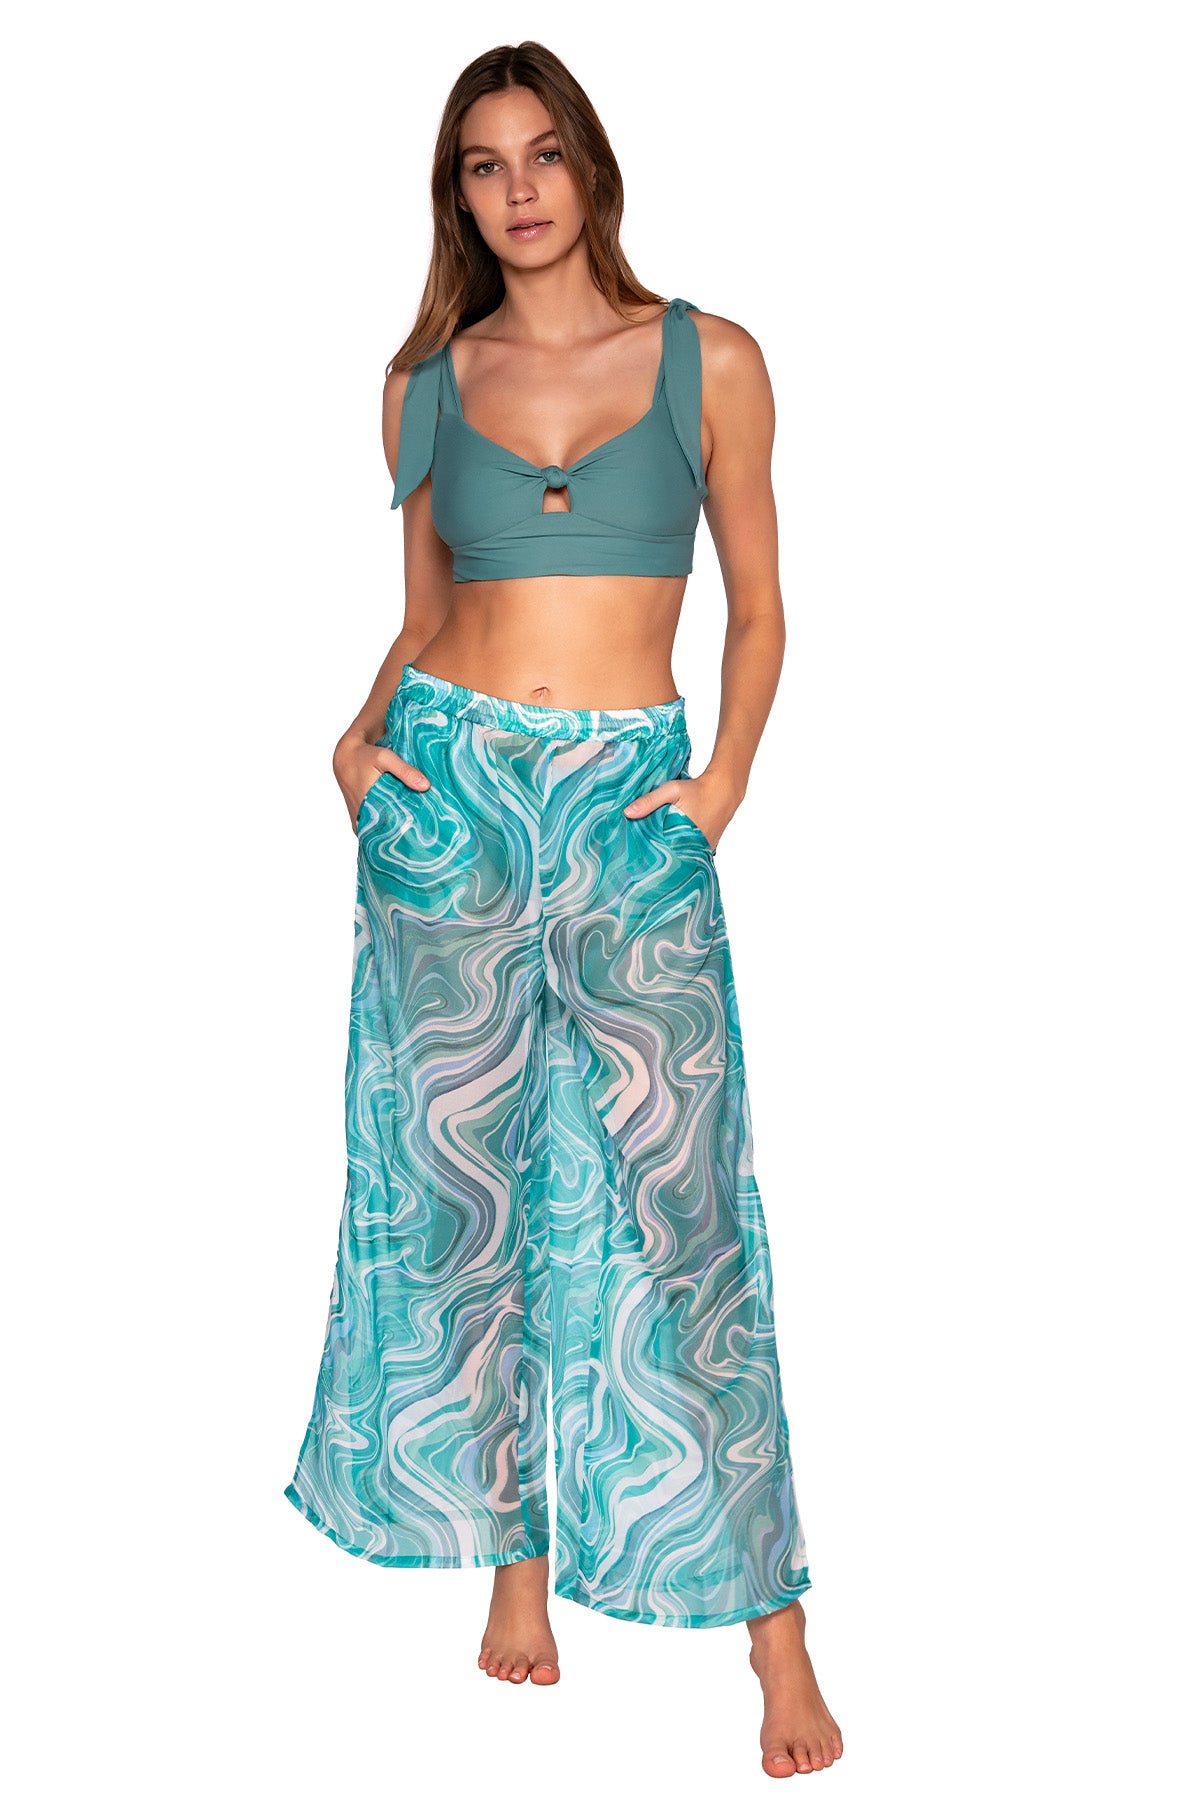 Front view of Sunsets Moon Tide Breezy Beach Pant